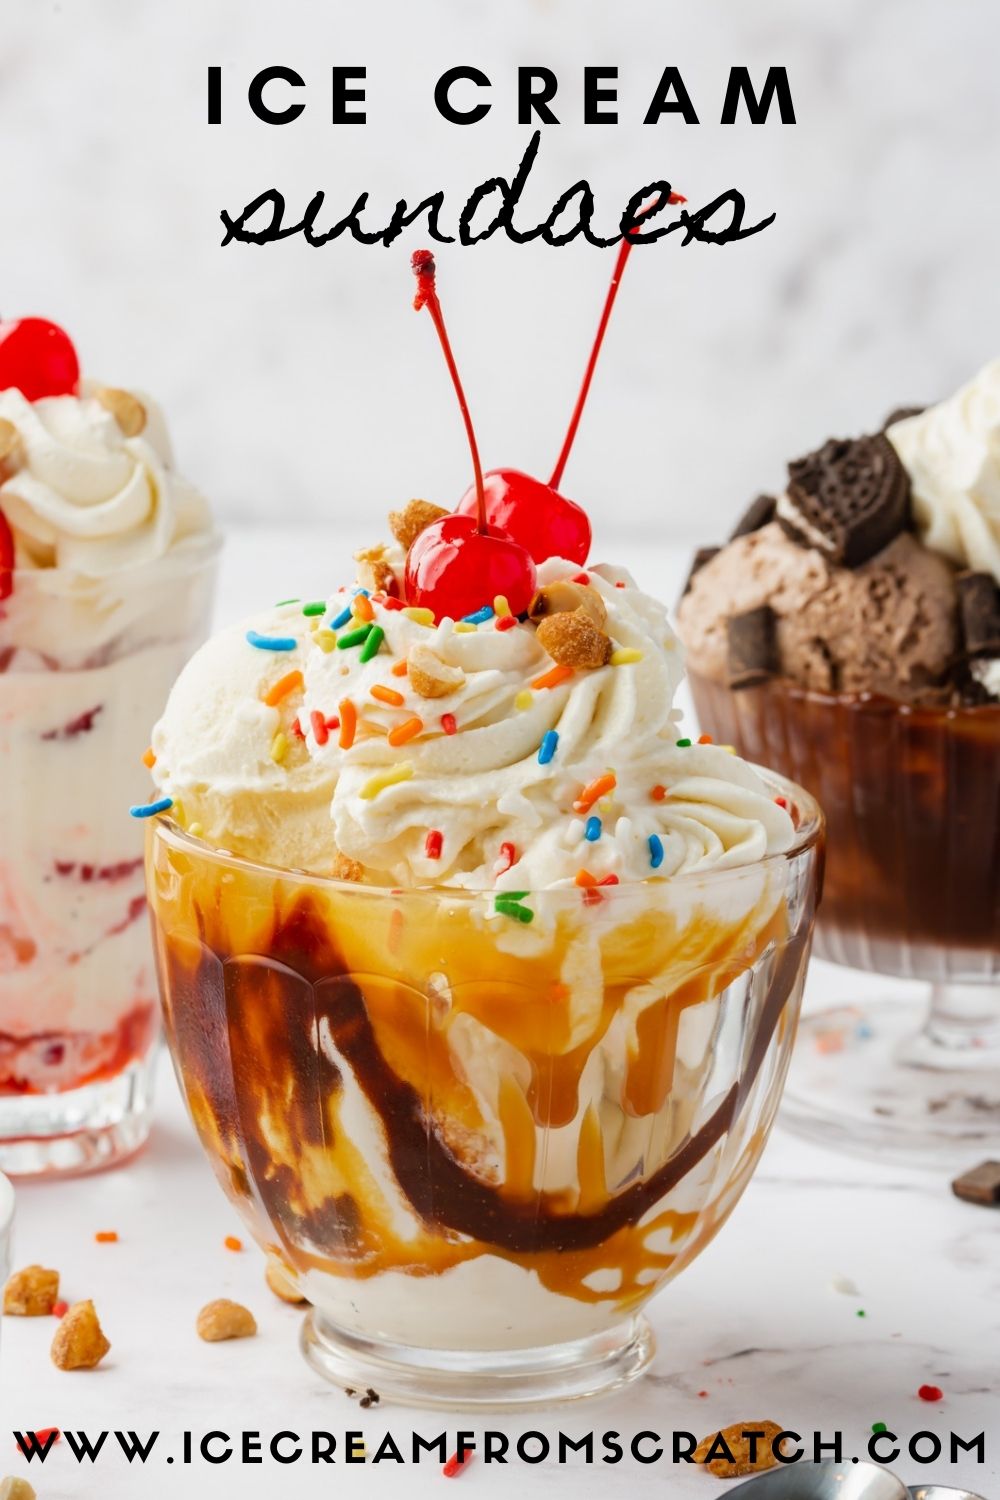 A glass bowl filled with a chocolate caramel ice cream sundae, topped with whipped cream, sprinkles, and two maraschino cherries. More ice cream sundaes of different varieties are in the background.